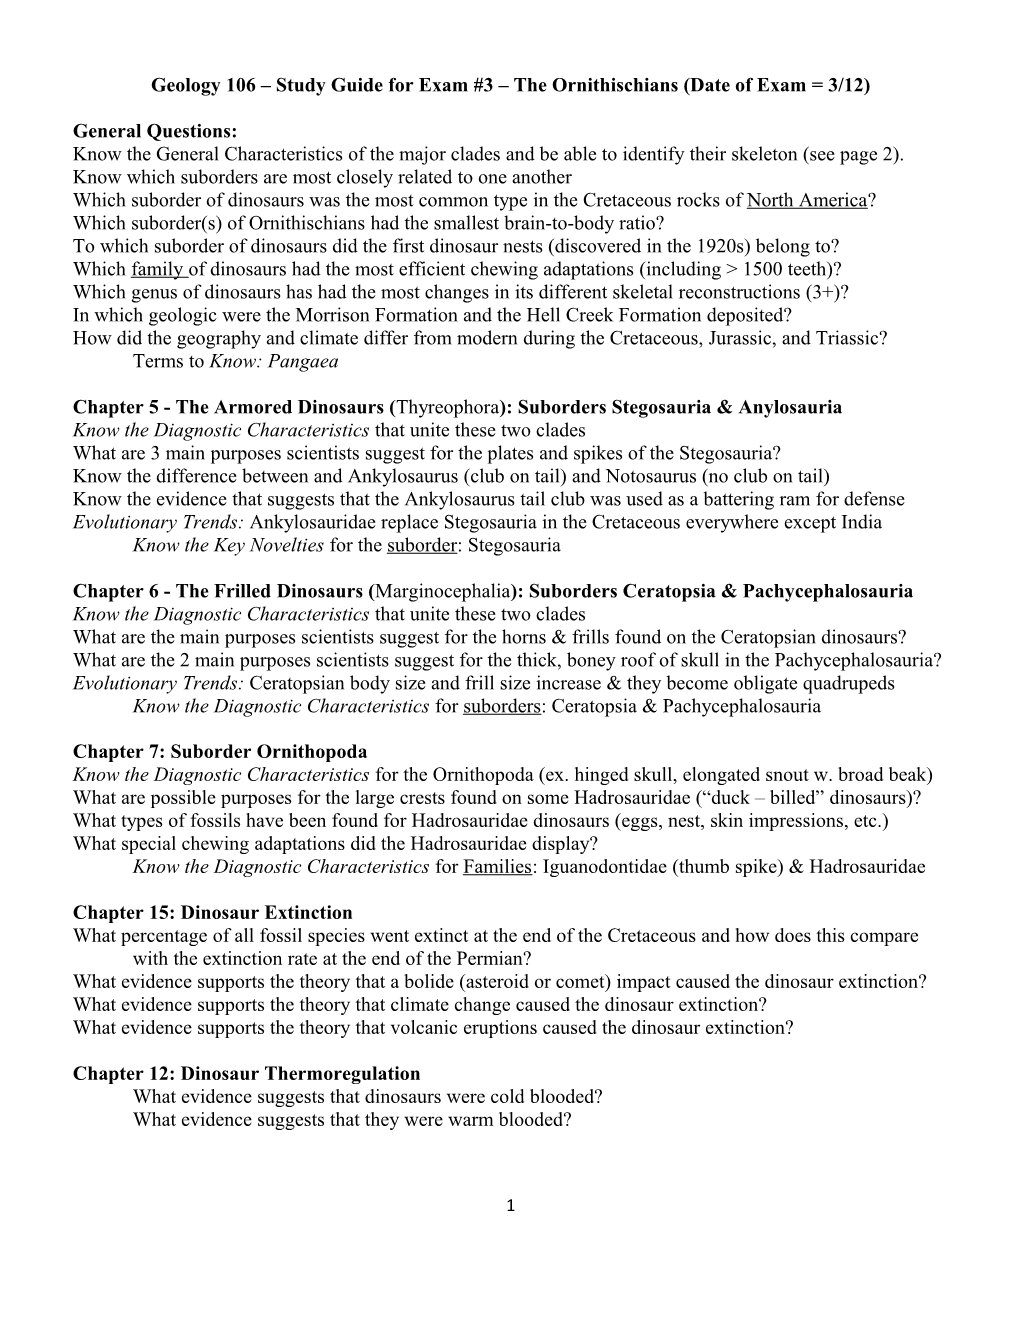 Geology 106 Study Guide for Exam #3 the Ornithischians (Date of Exam = 3/12)